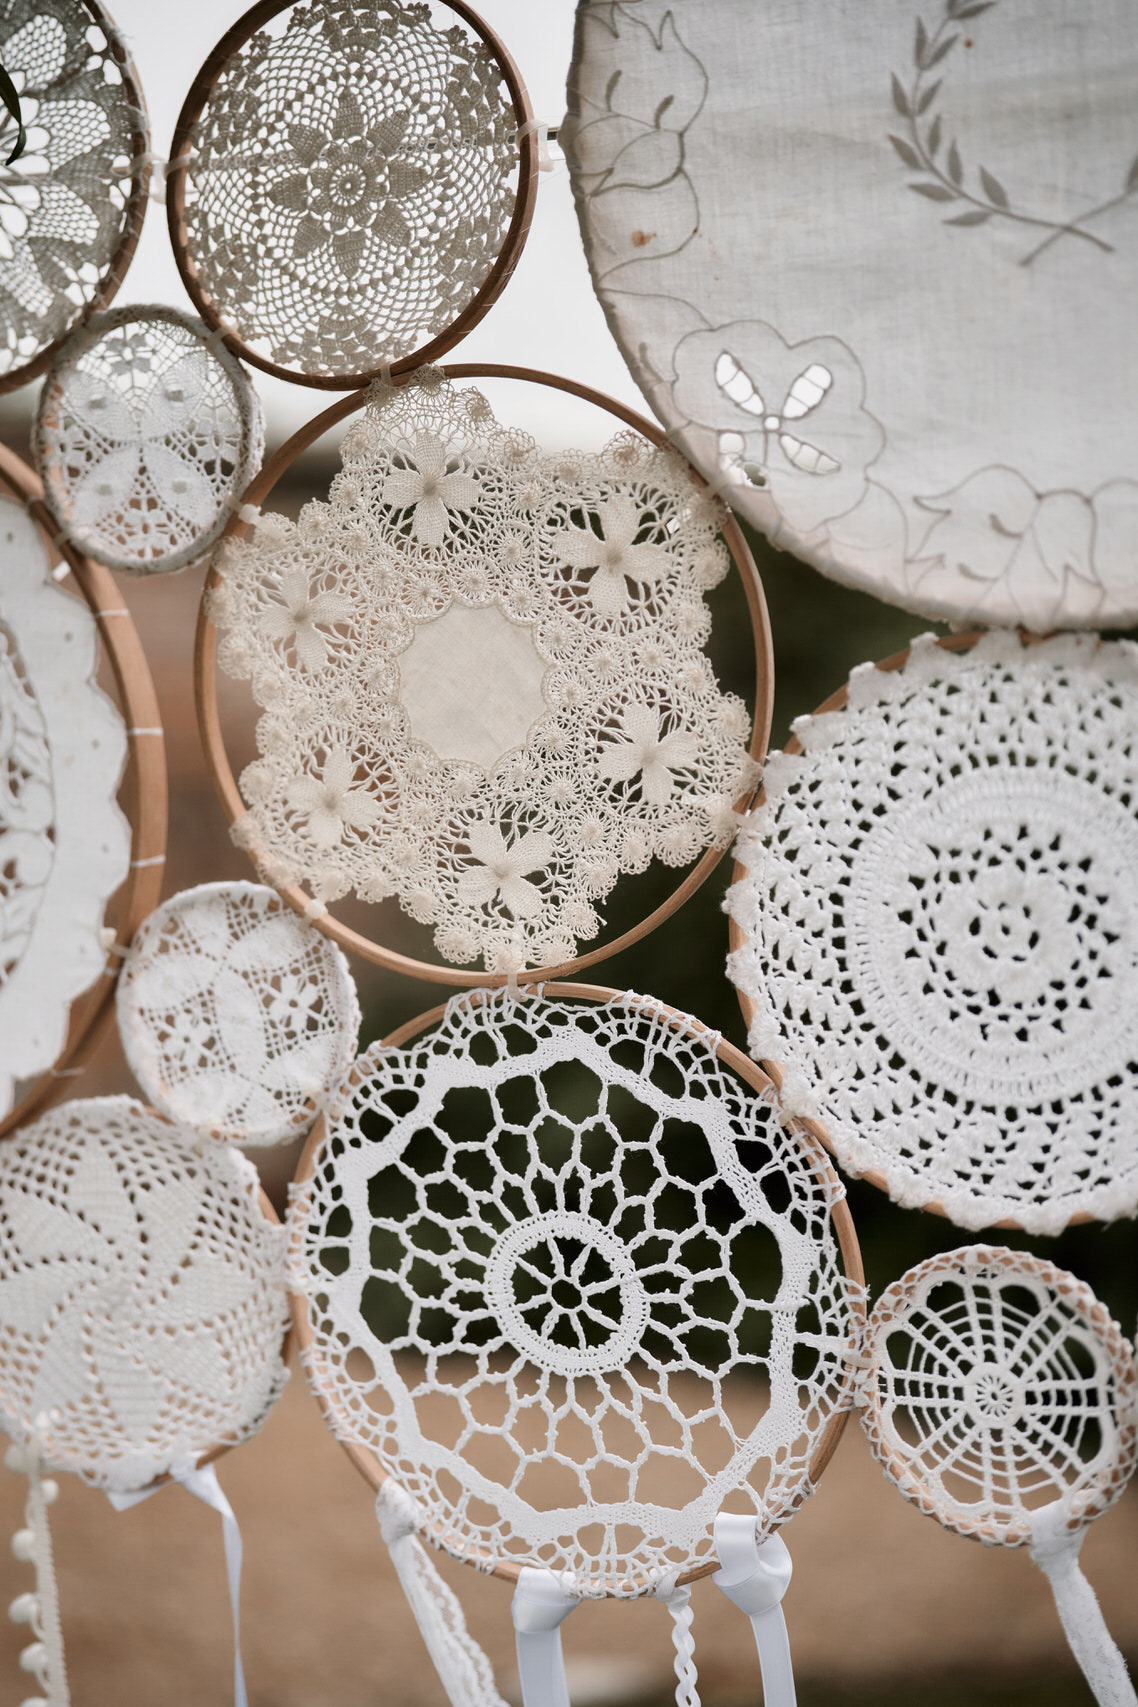 Some lace table mats are hanging from a tree.